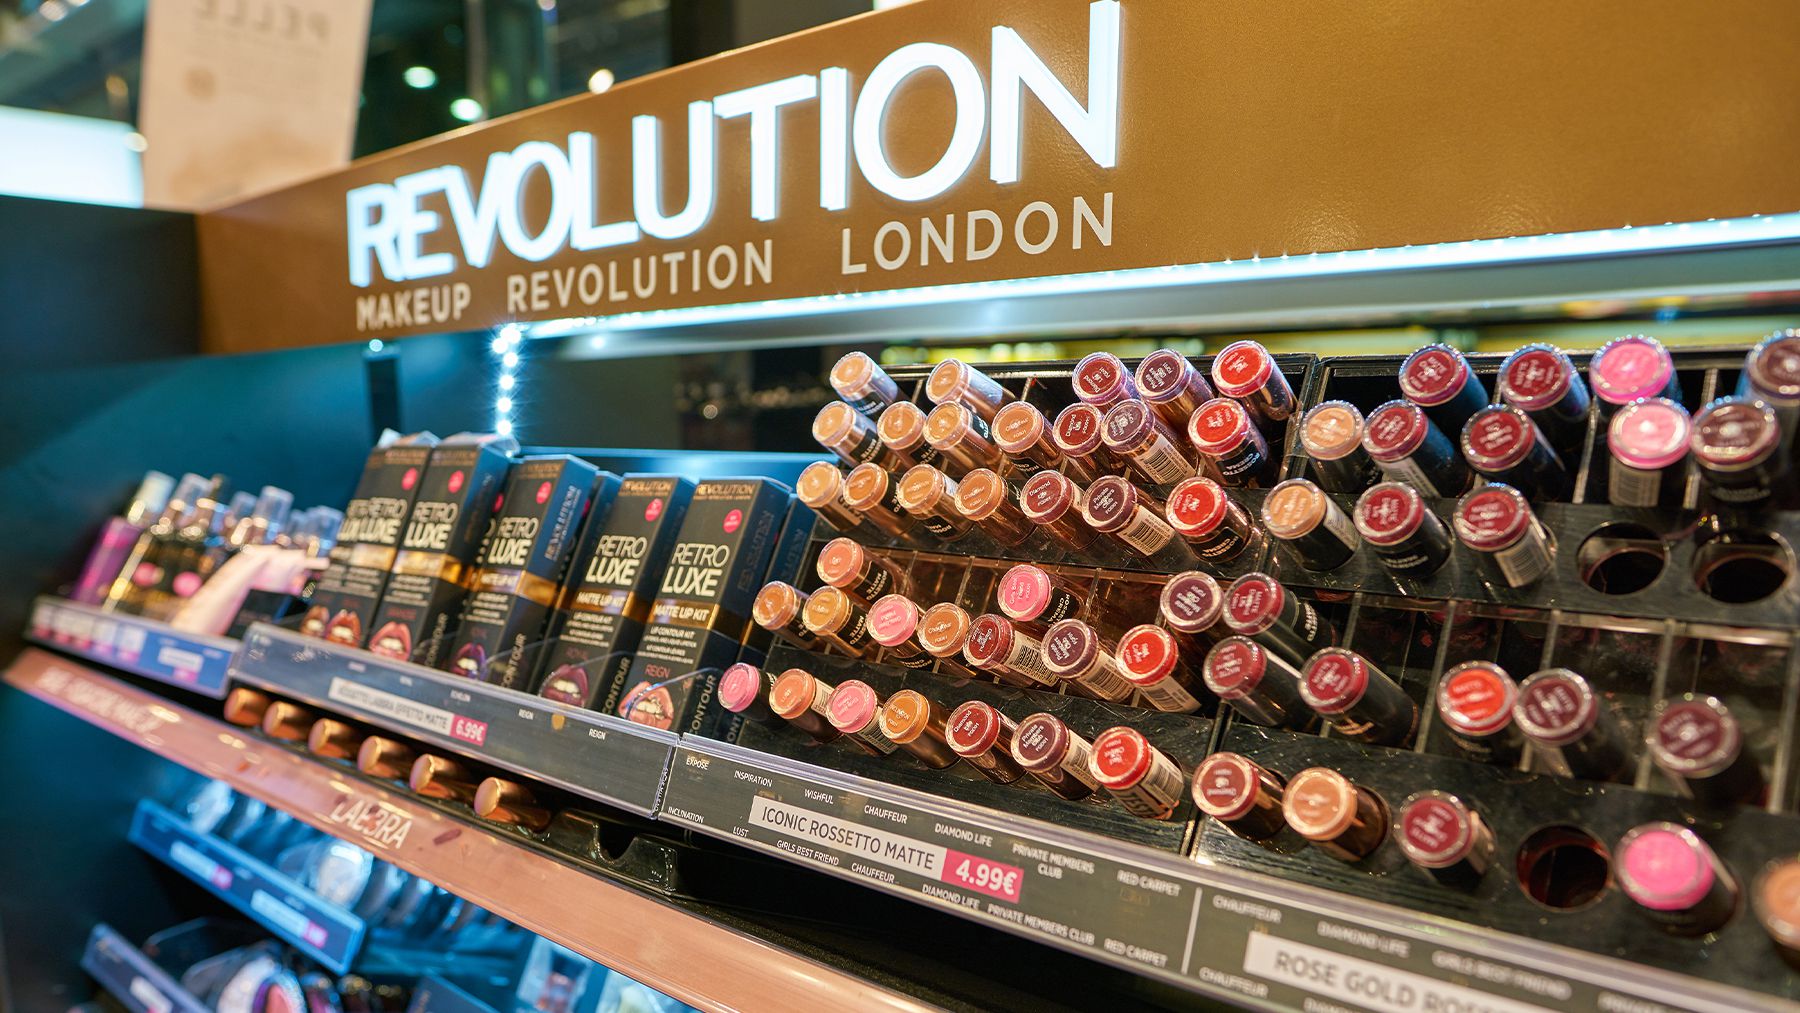 Shareholder Boohoo to Oppose Revolution Beauty CEO Reappointment